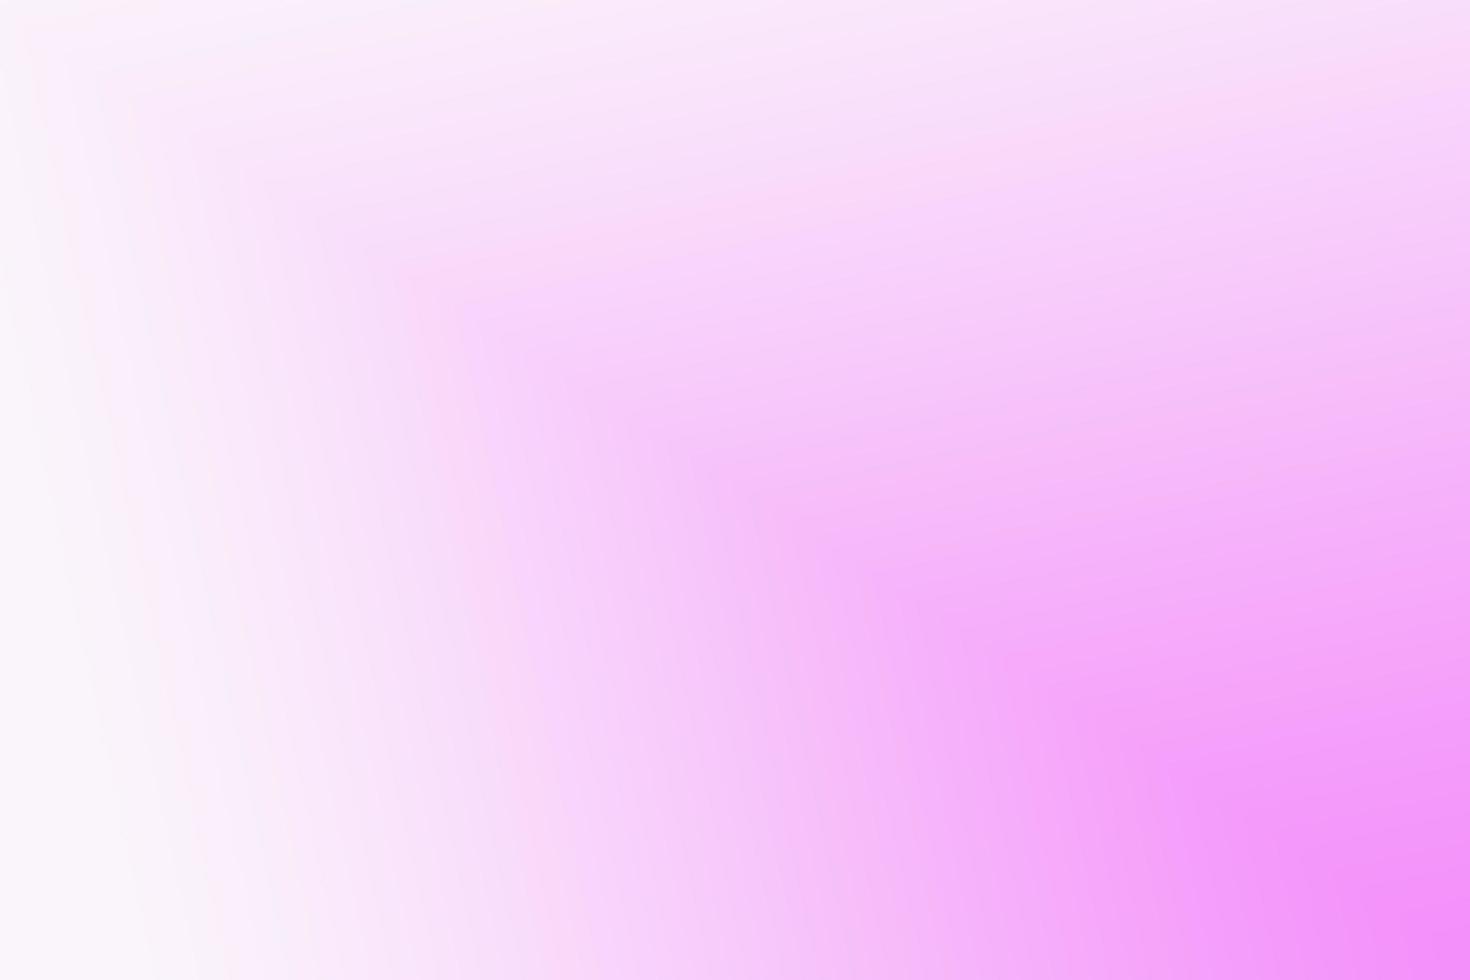 pastel pink background with space photo